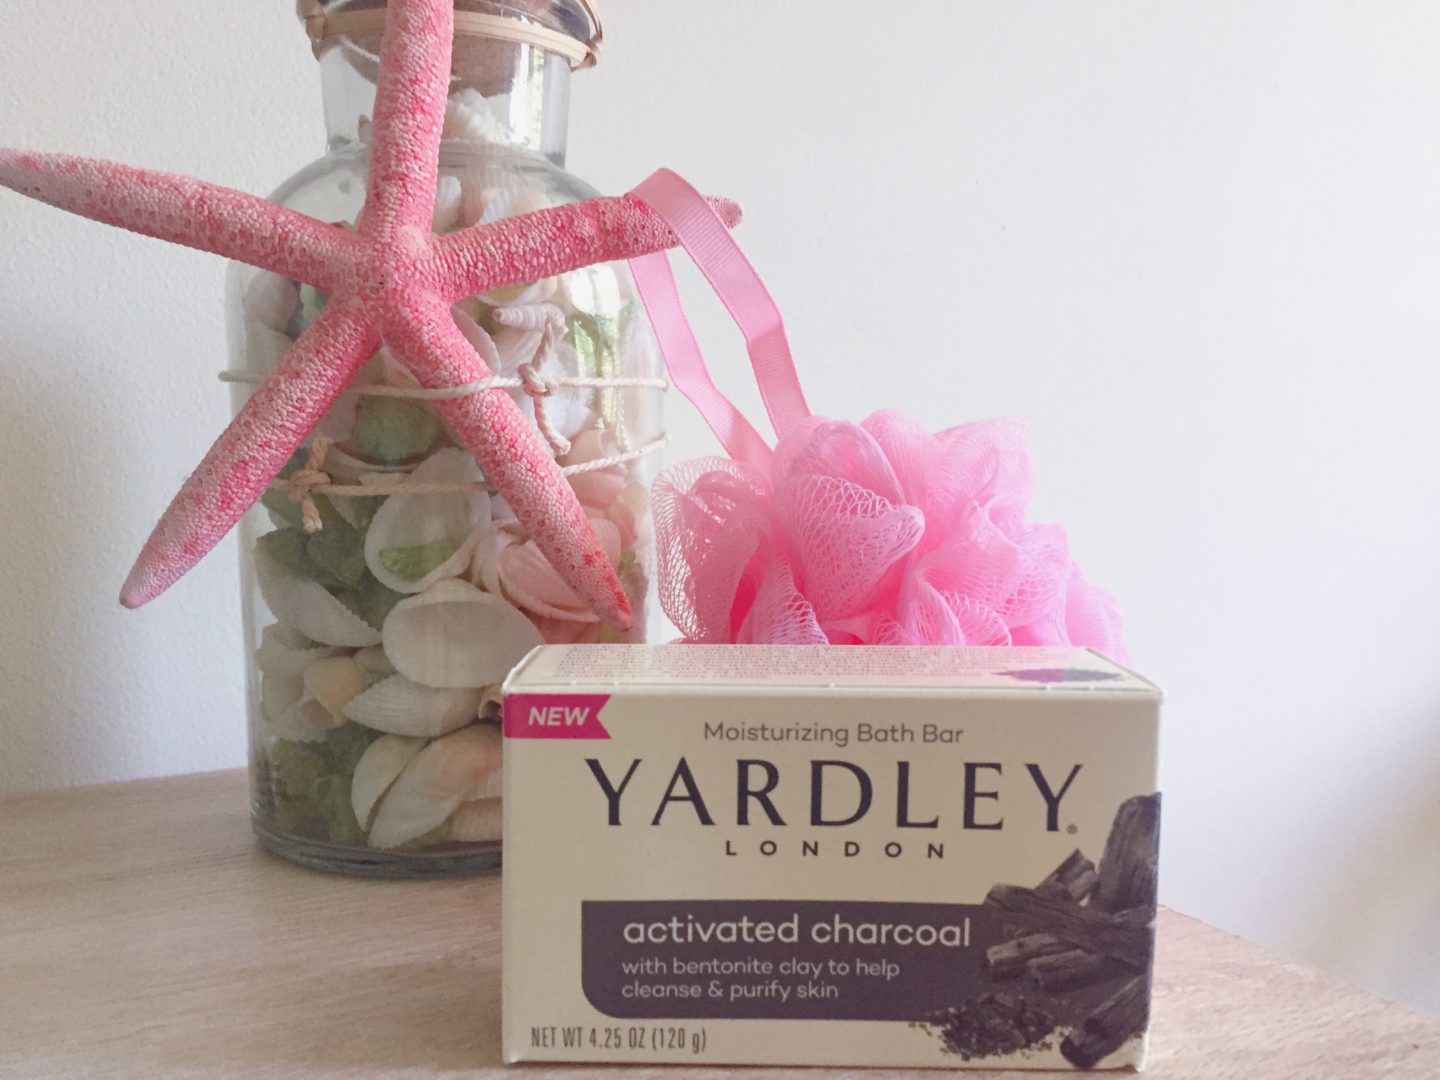 Pamper Your Skin with New Activated Charcoal Bath Bar from Yardley London